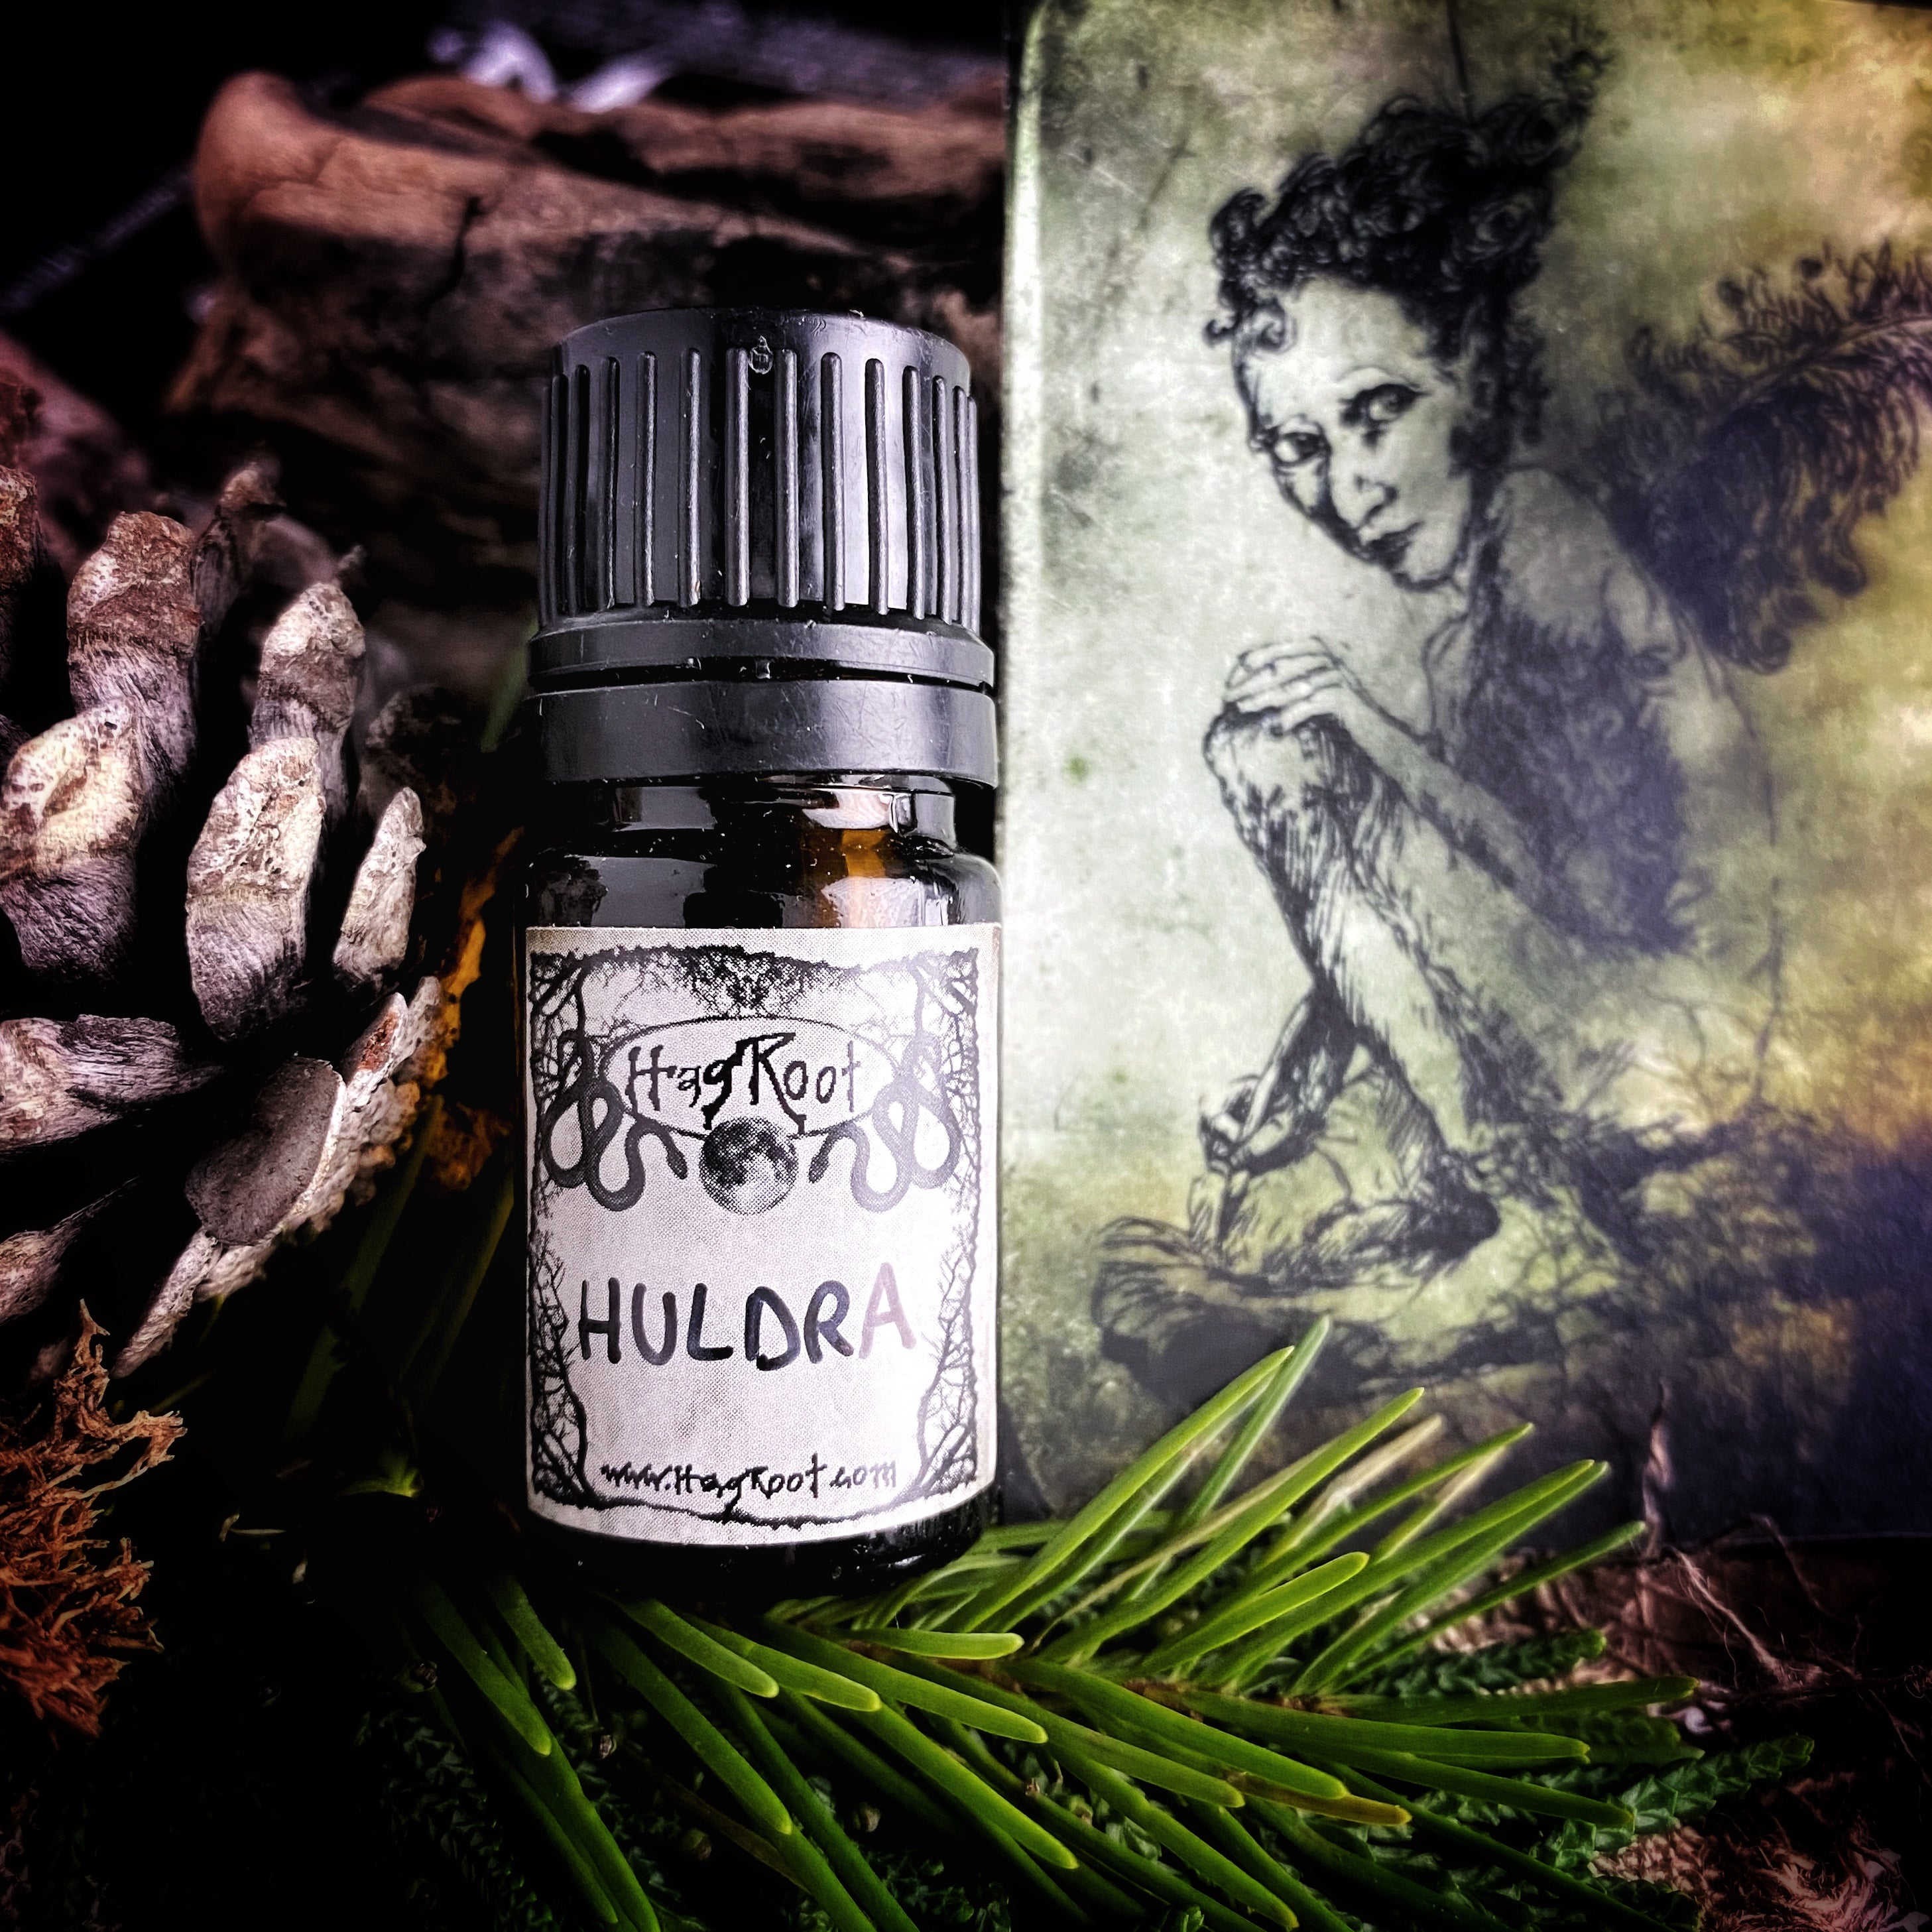 HULDRA-(Dark Spices, Haunted Woods, Warm Vanilla)-Perfume, Cologne, Anointing, Ritual Oil